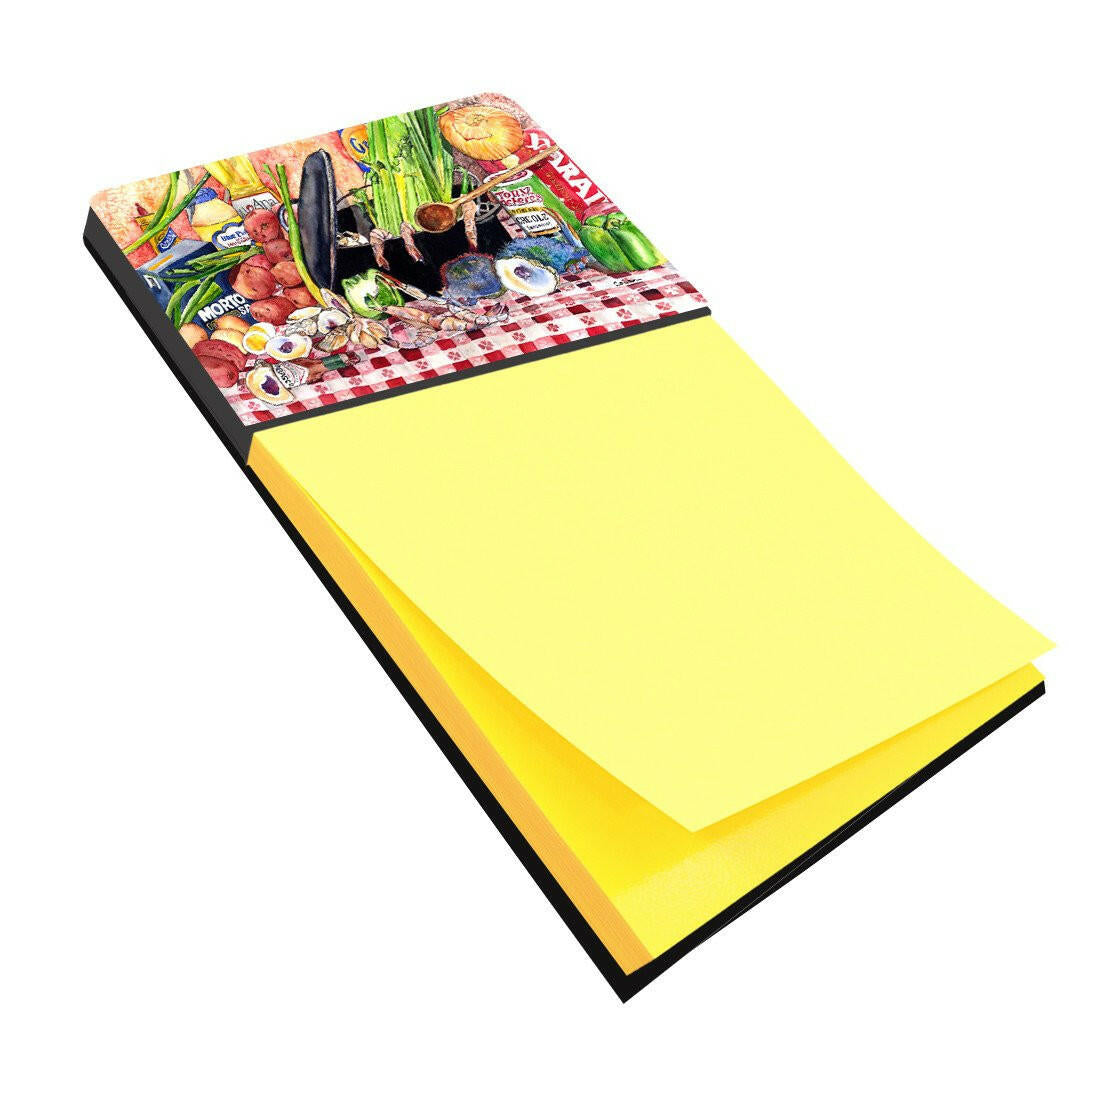 Gumbo and Potato Salad Refiillable Sticky Note Holder or Postit Note Dispenser 8825SN by Caroline&#39;s Treasures